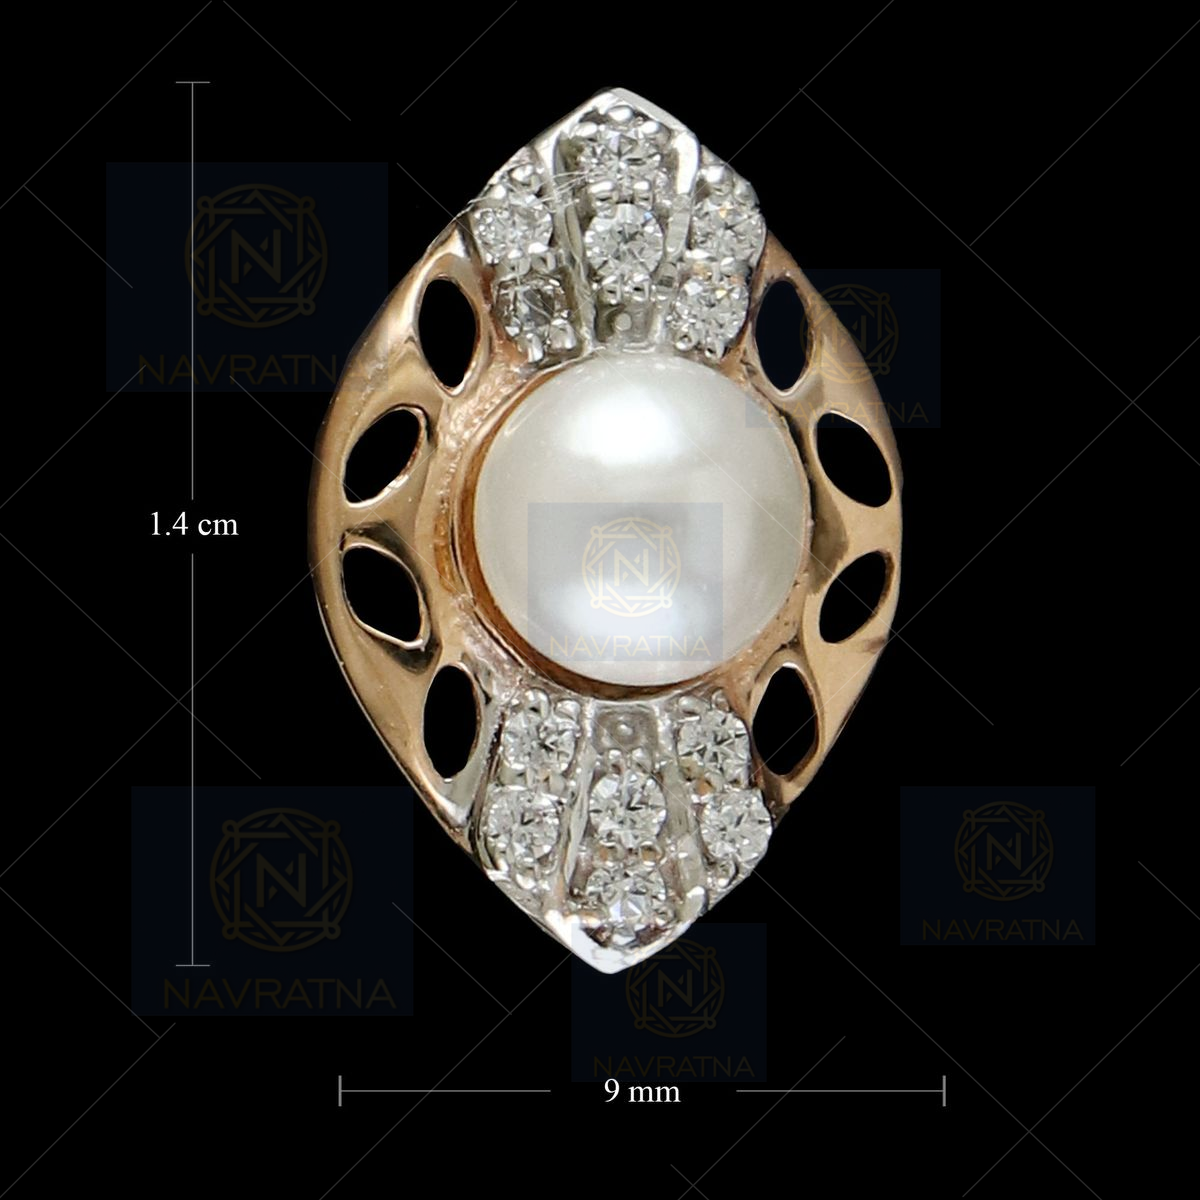 Natural Pearl Ring For Men And Women, Certified Moti Ring